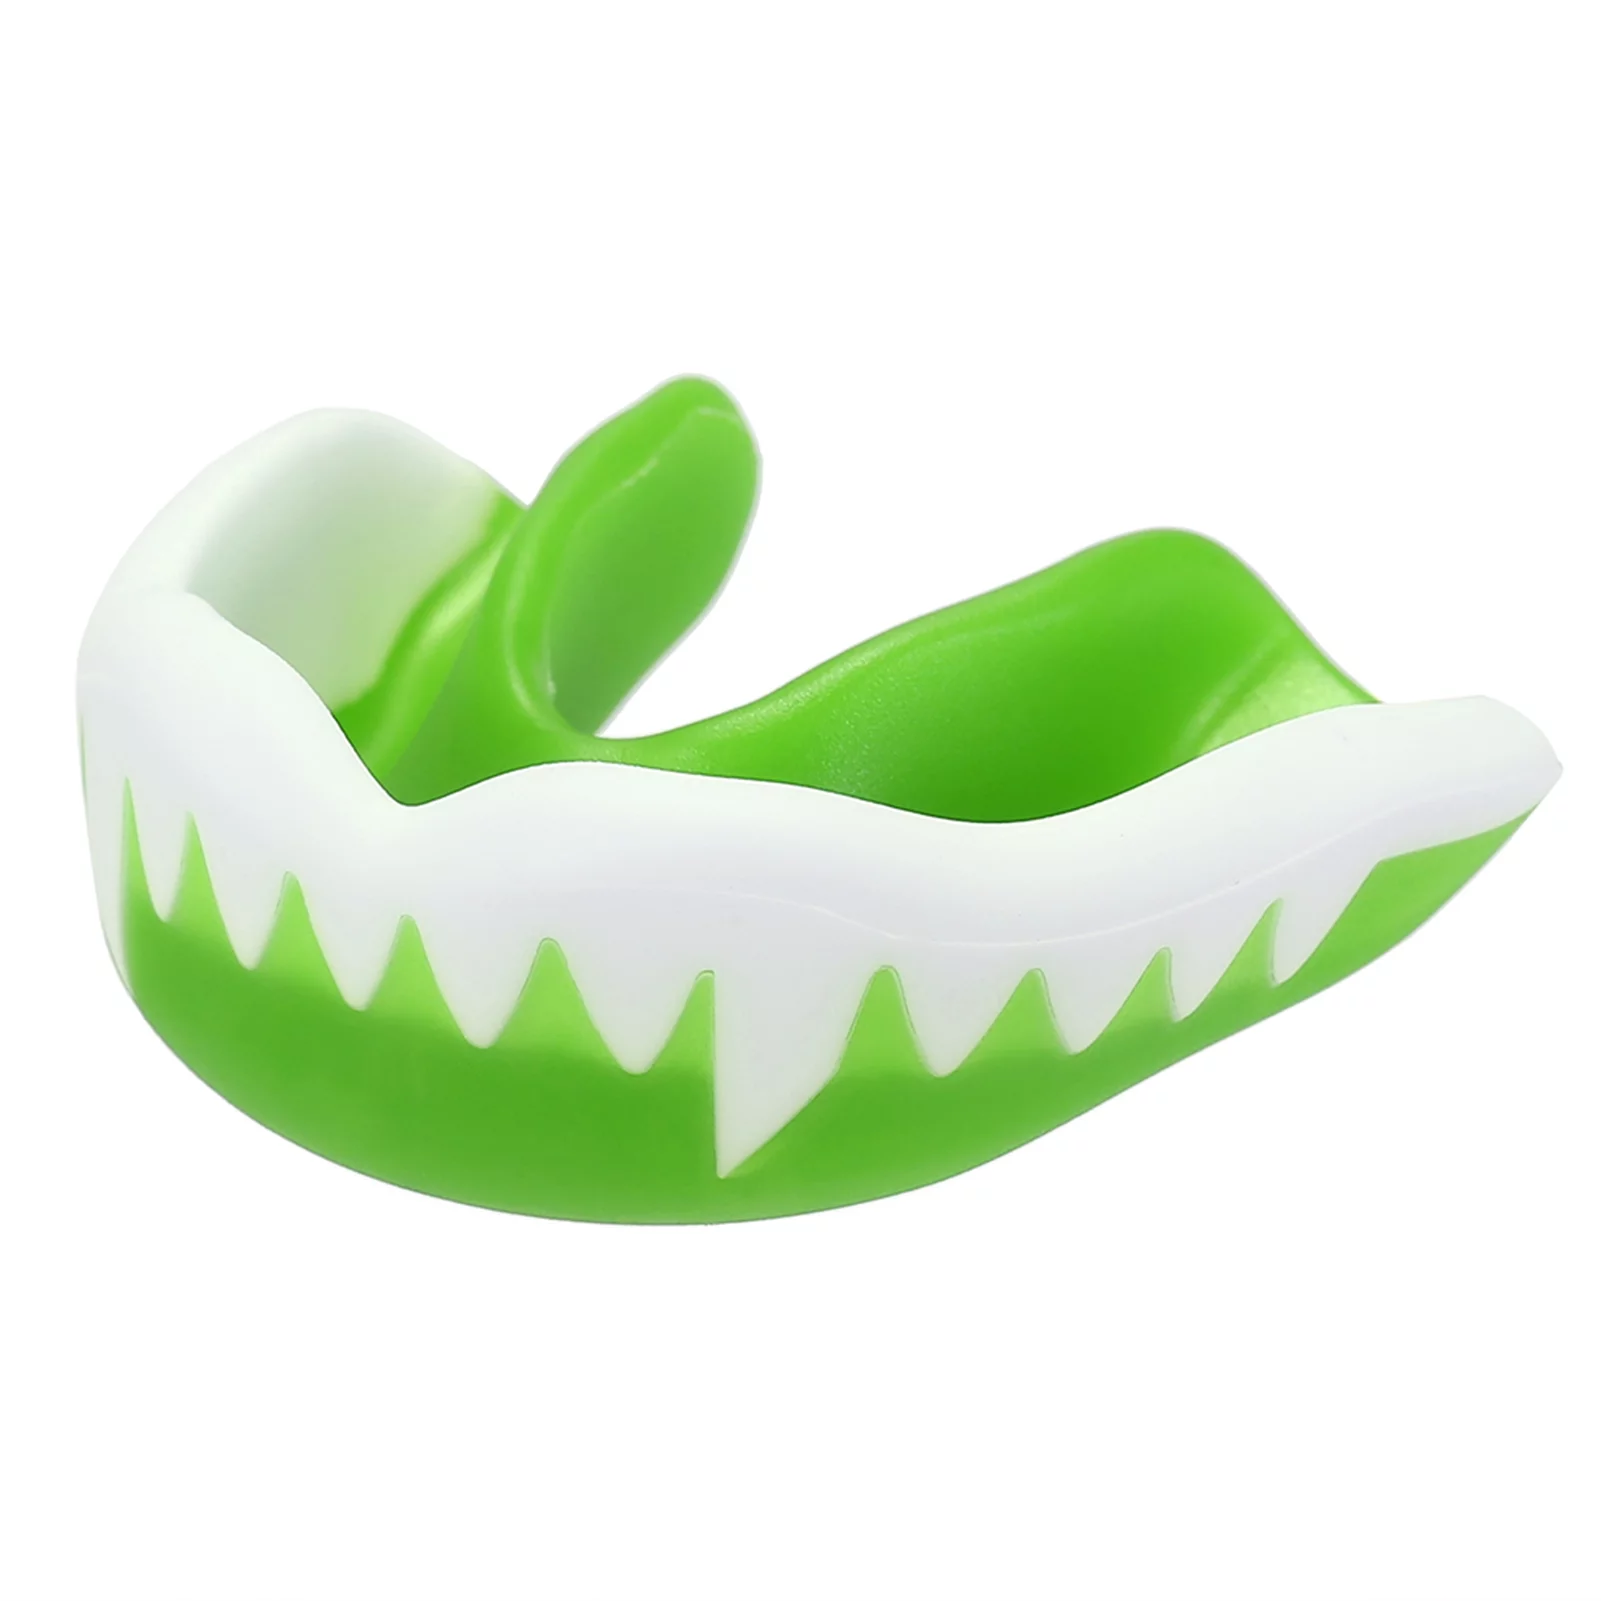 Tomshoo Soft and  Mouth Guard Food Grade Tooth Protector for Boxing, Karate, and Muay Thai